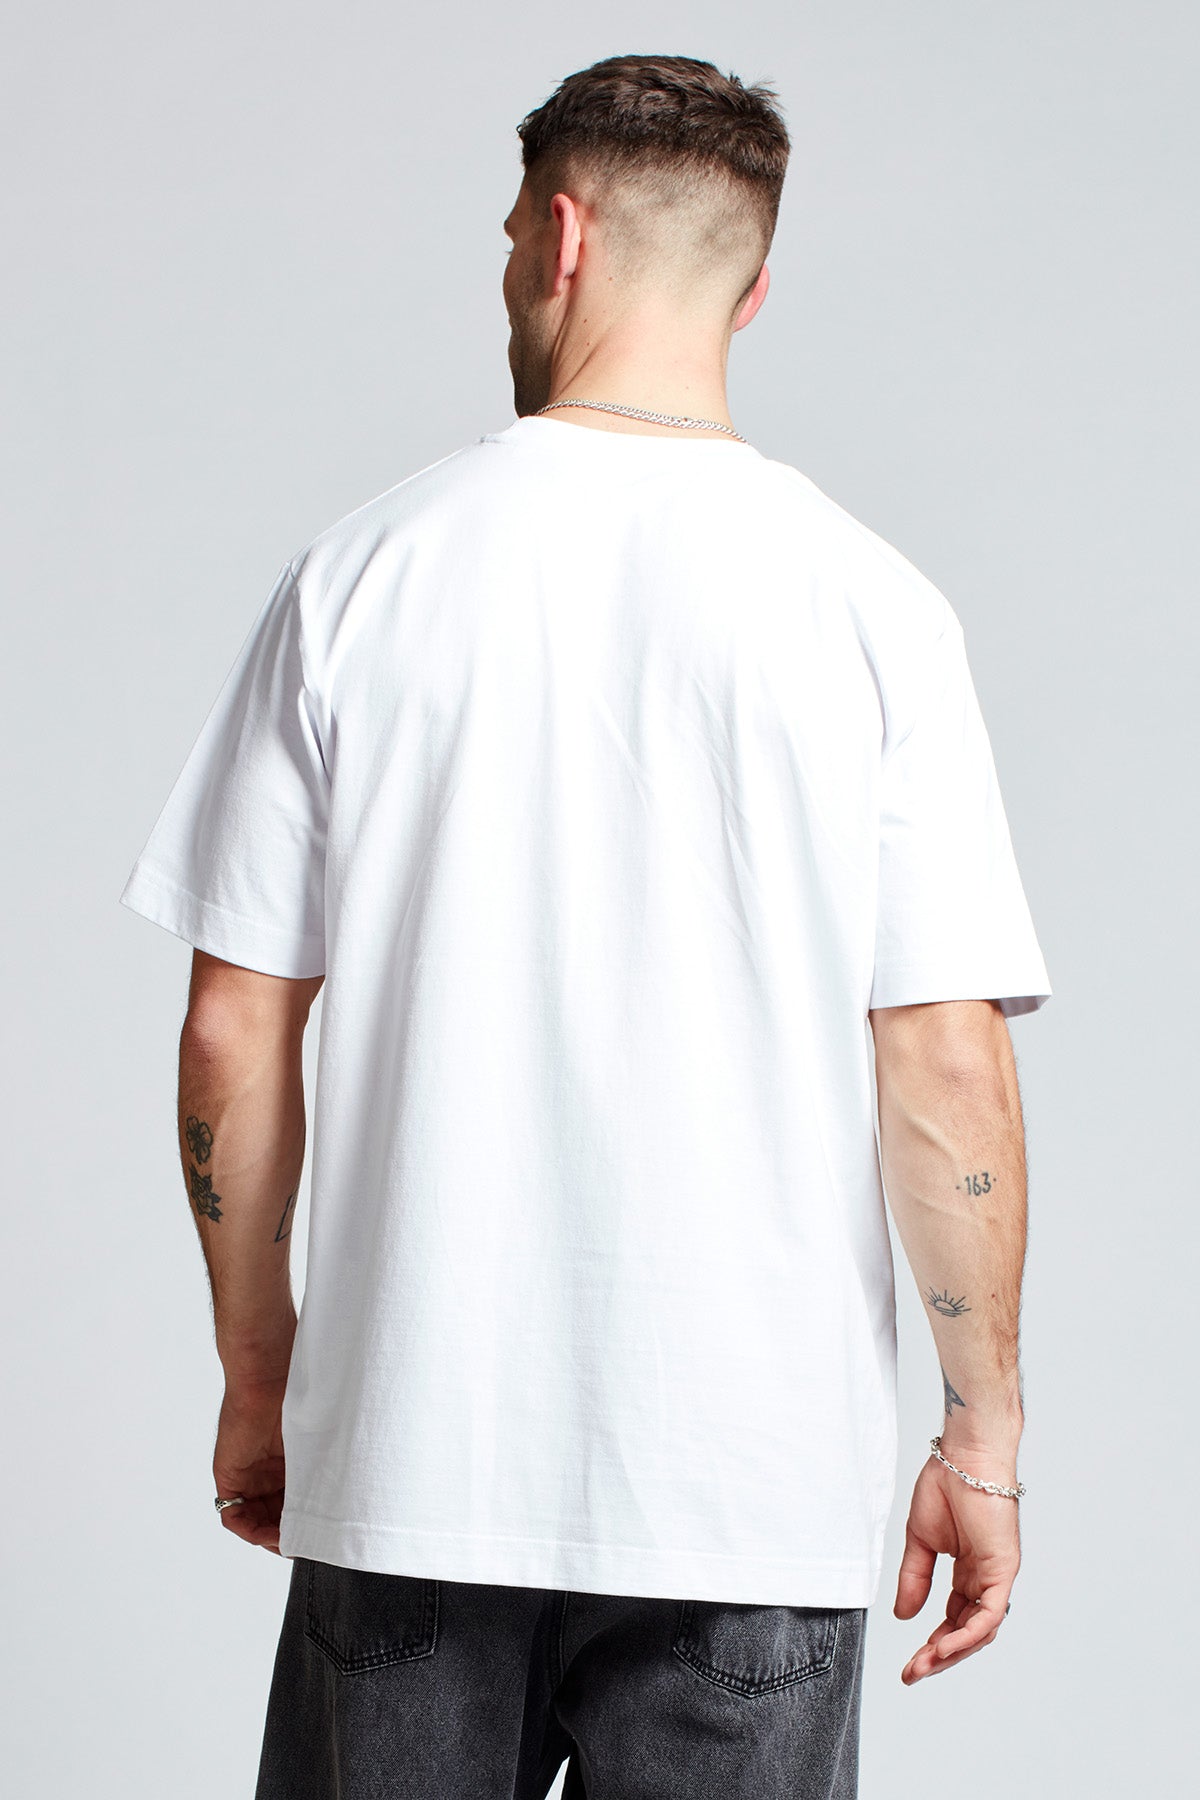 Saturday Society Live Fast T-shirt in White